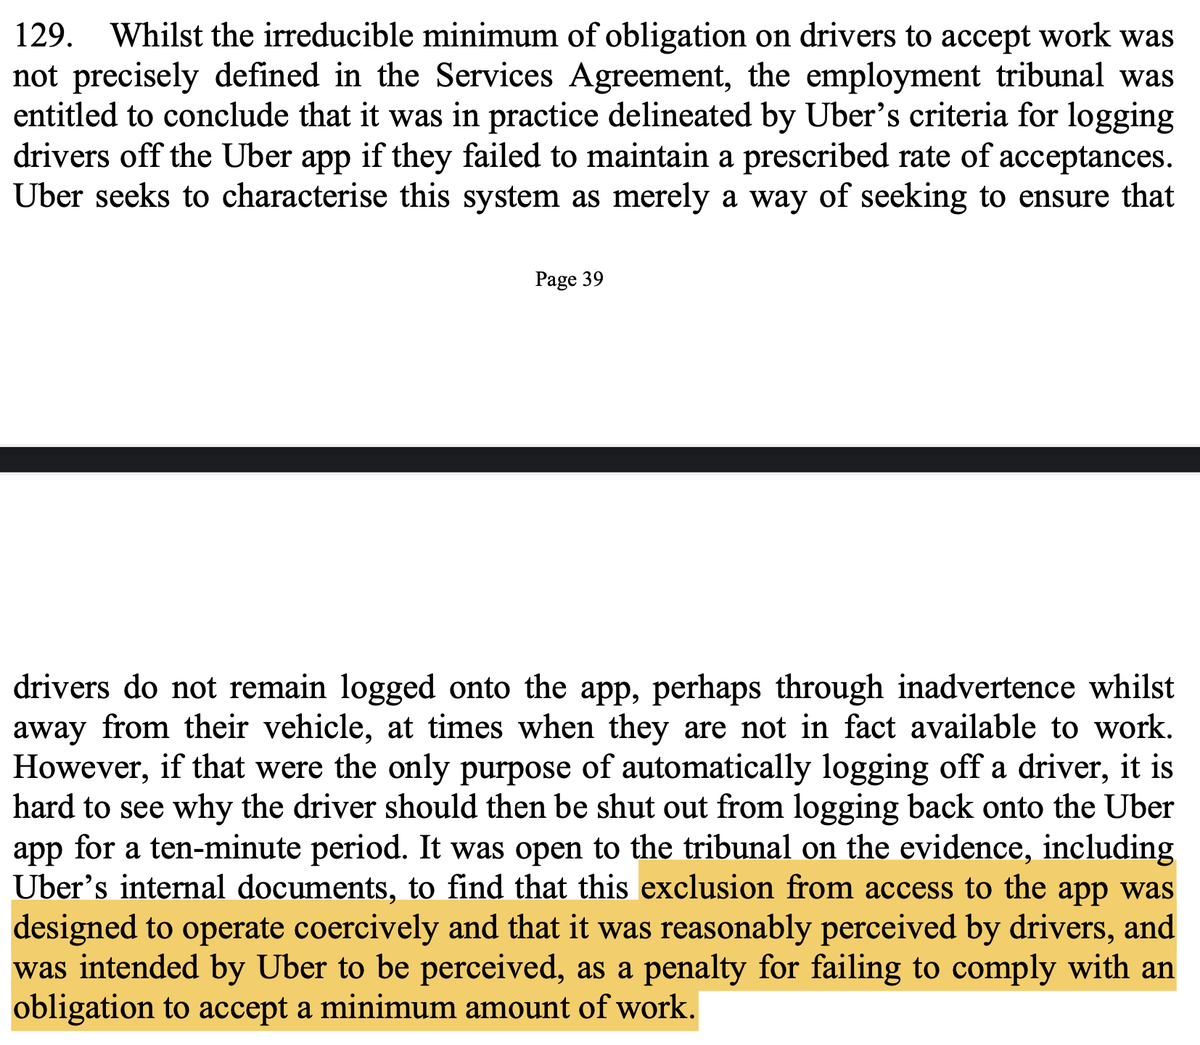 But that’s the very point: ‘exclusion from access to the app was designed to operate coercively … as a penalty for failing to comply with an obligation to accept a minimum amount of work. ‘